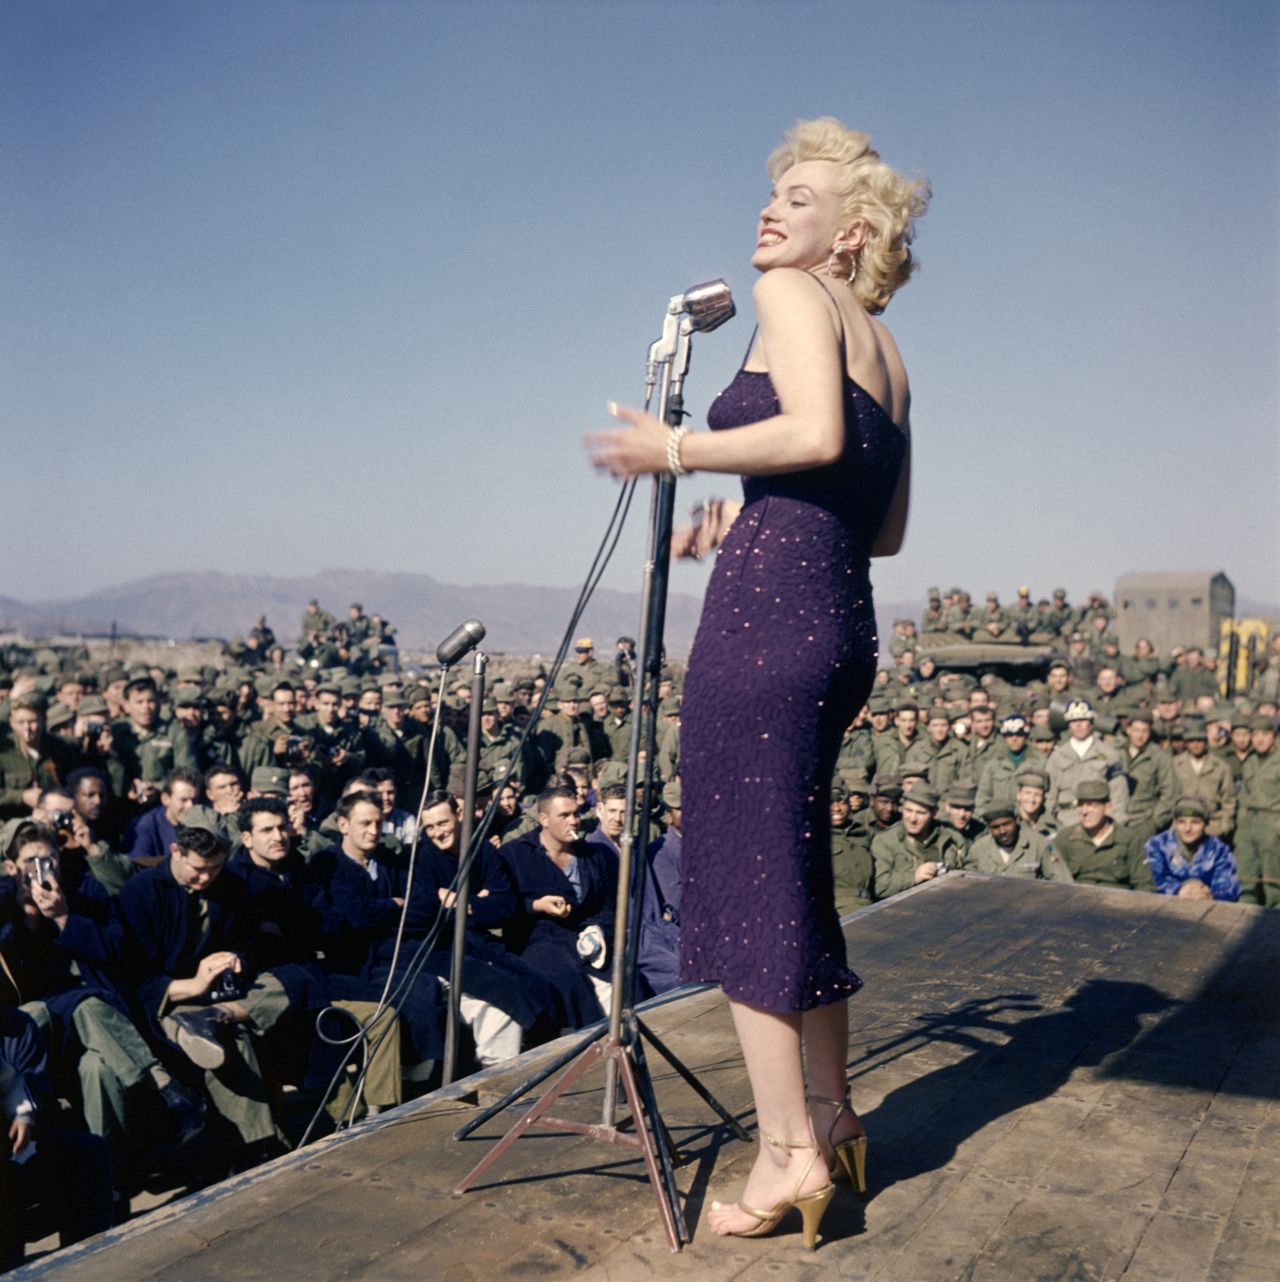 Thousands of US Marines stationed in Korea gathered to listen to Monroe sing. "The highlight of my life was singing for the soldiers there," she said. "I stood out on an open stage, and it was cold, but I swear I didn't feel a thing except good."